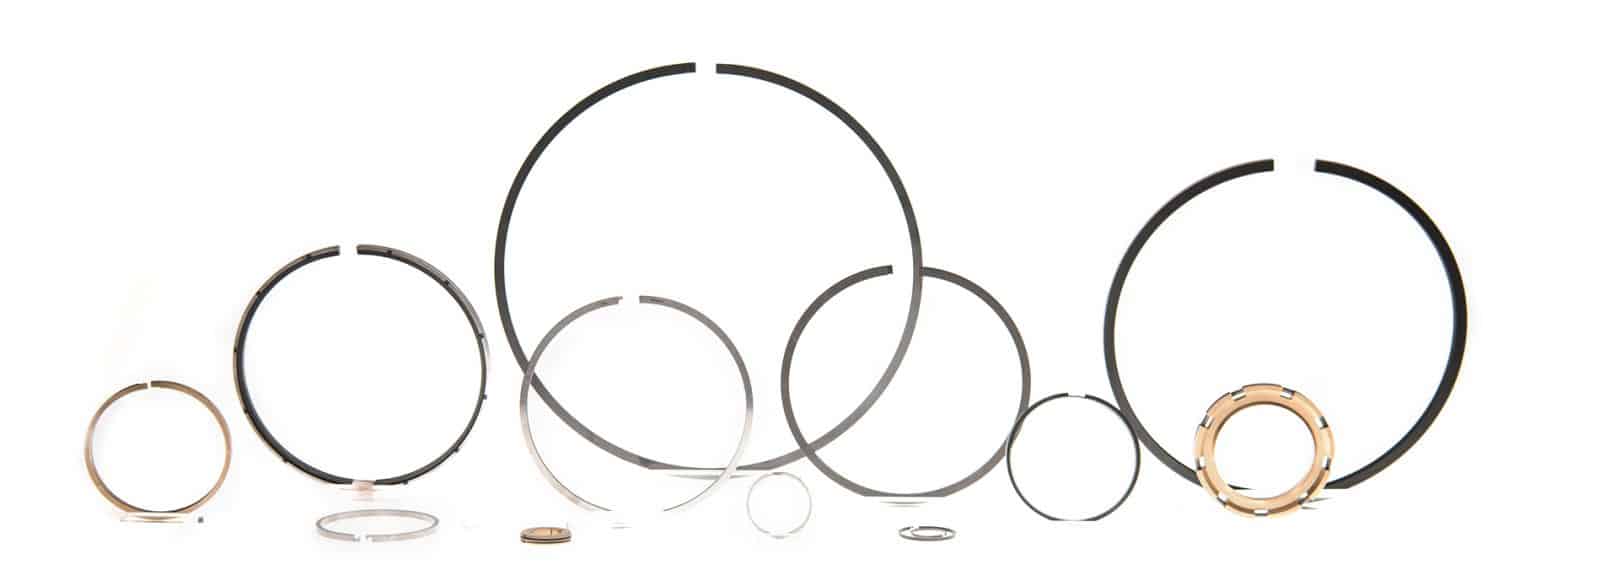 Piston Ring Material Choices | PDF